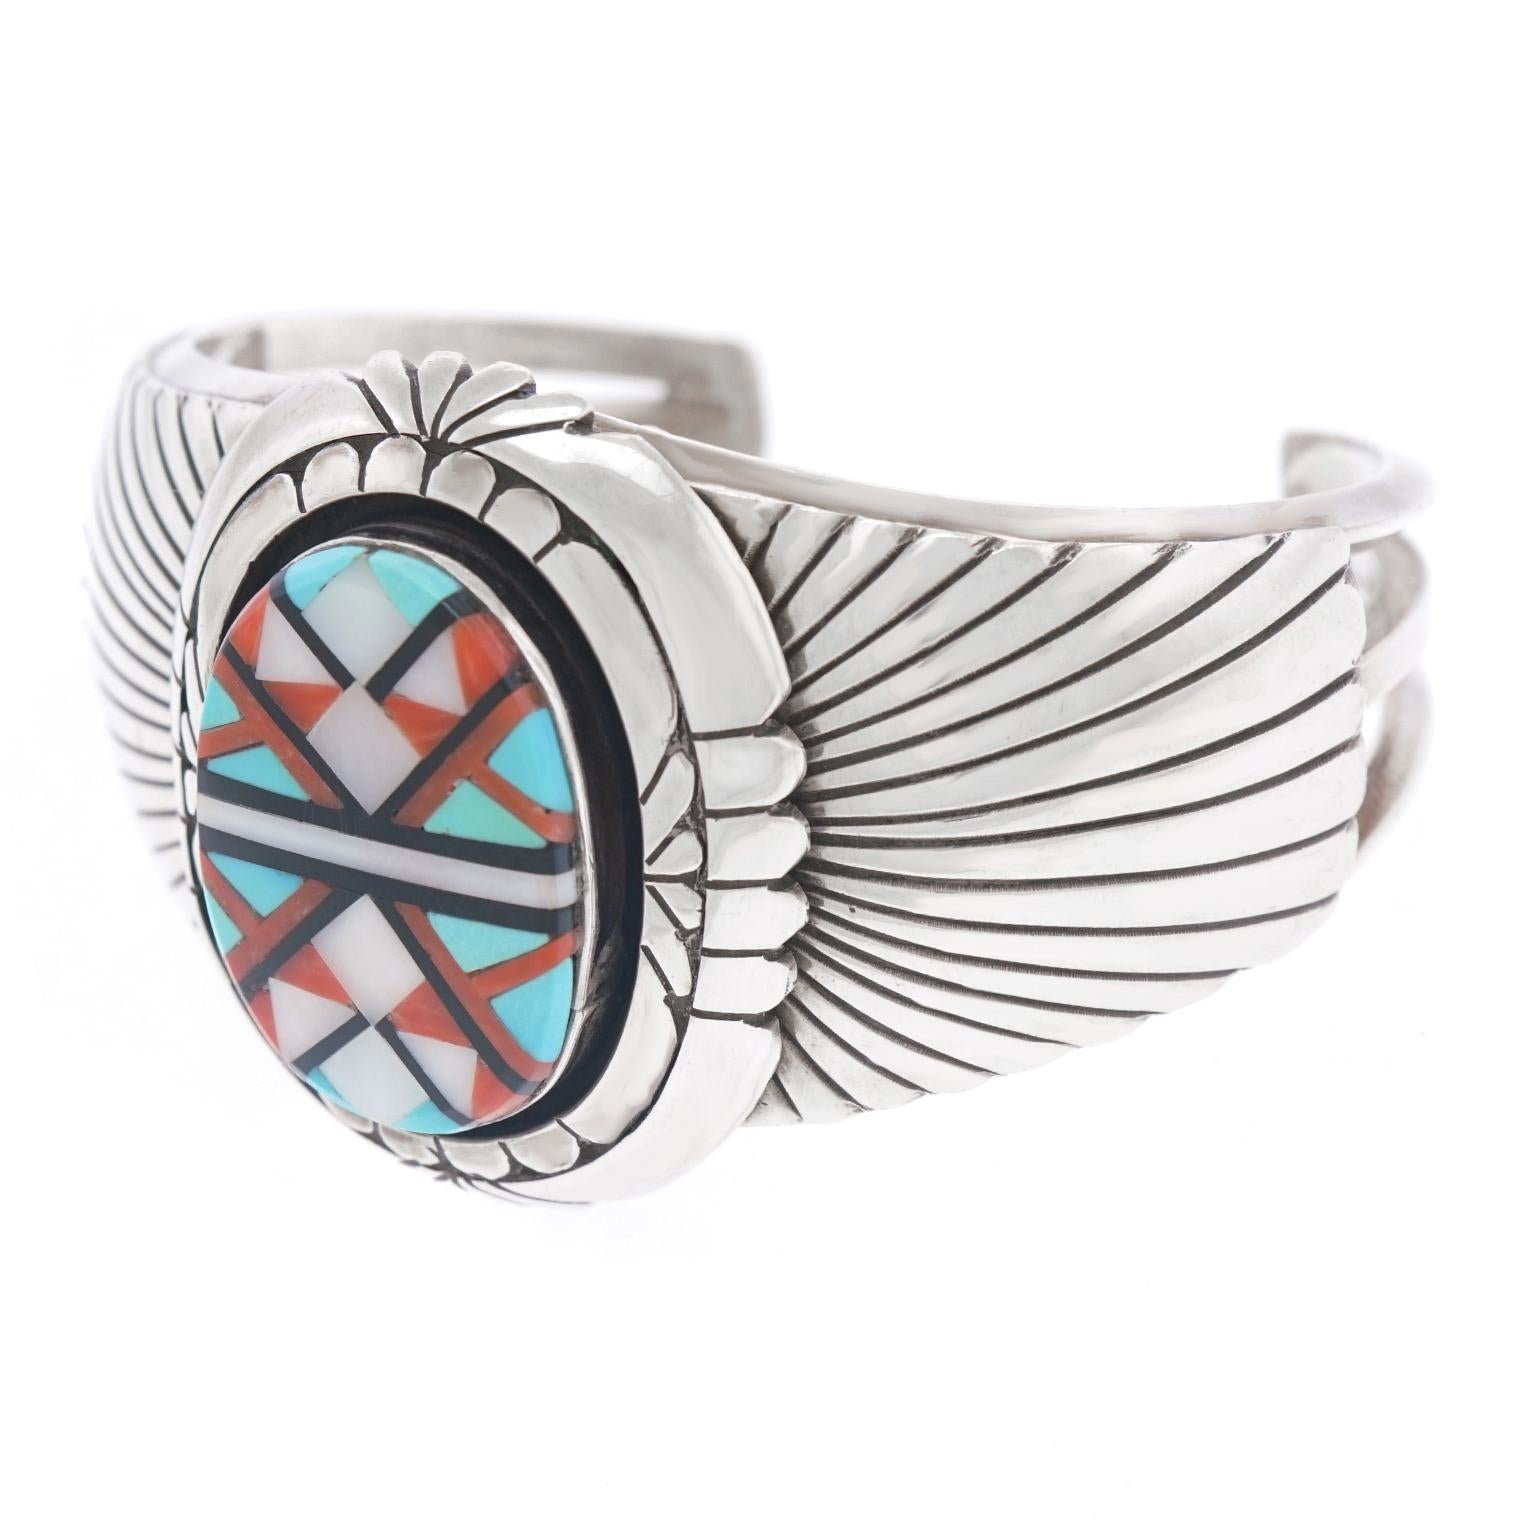 Women's or Men's Navajo Inlaid Sterling Cuff Bracelet by Abraham Begay